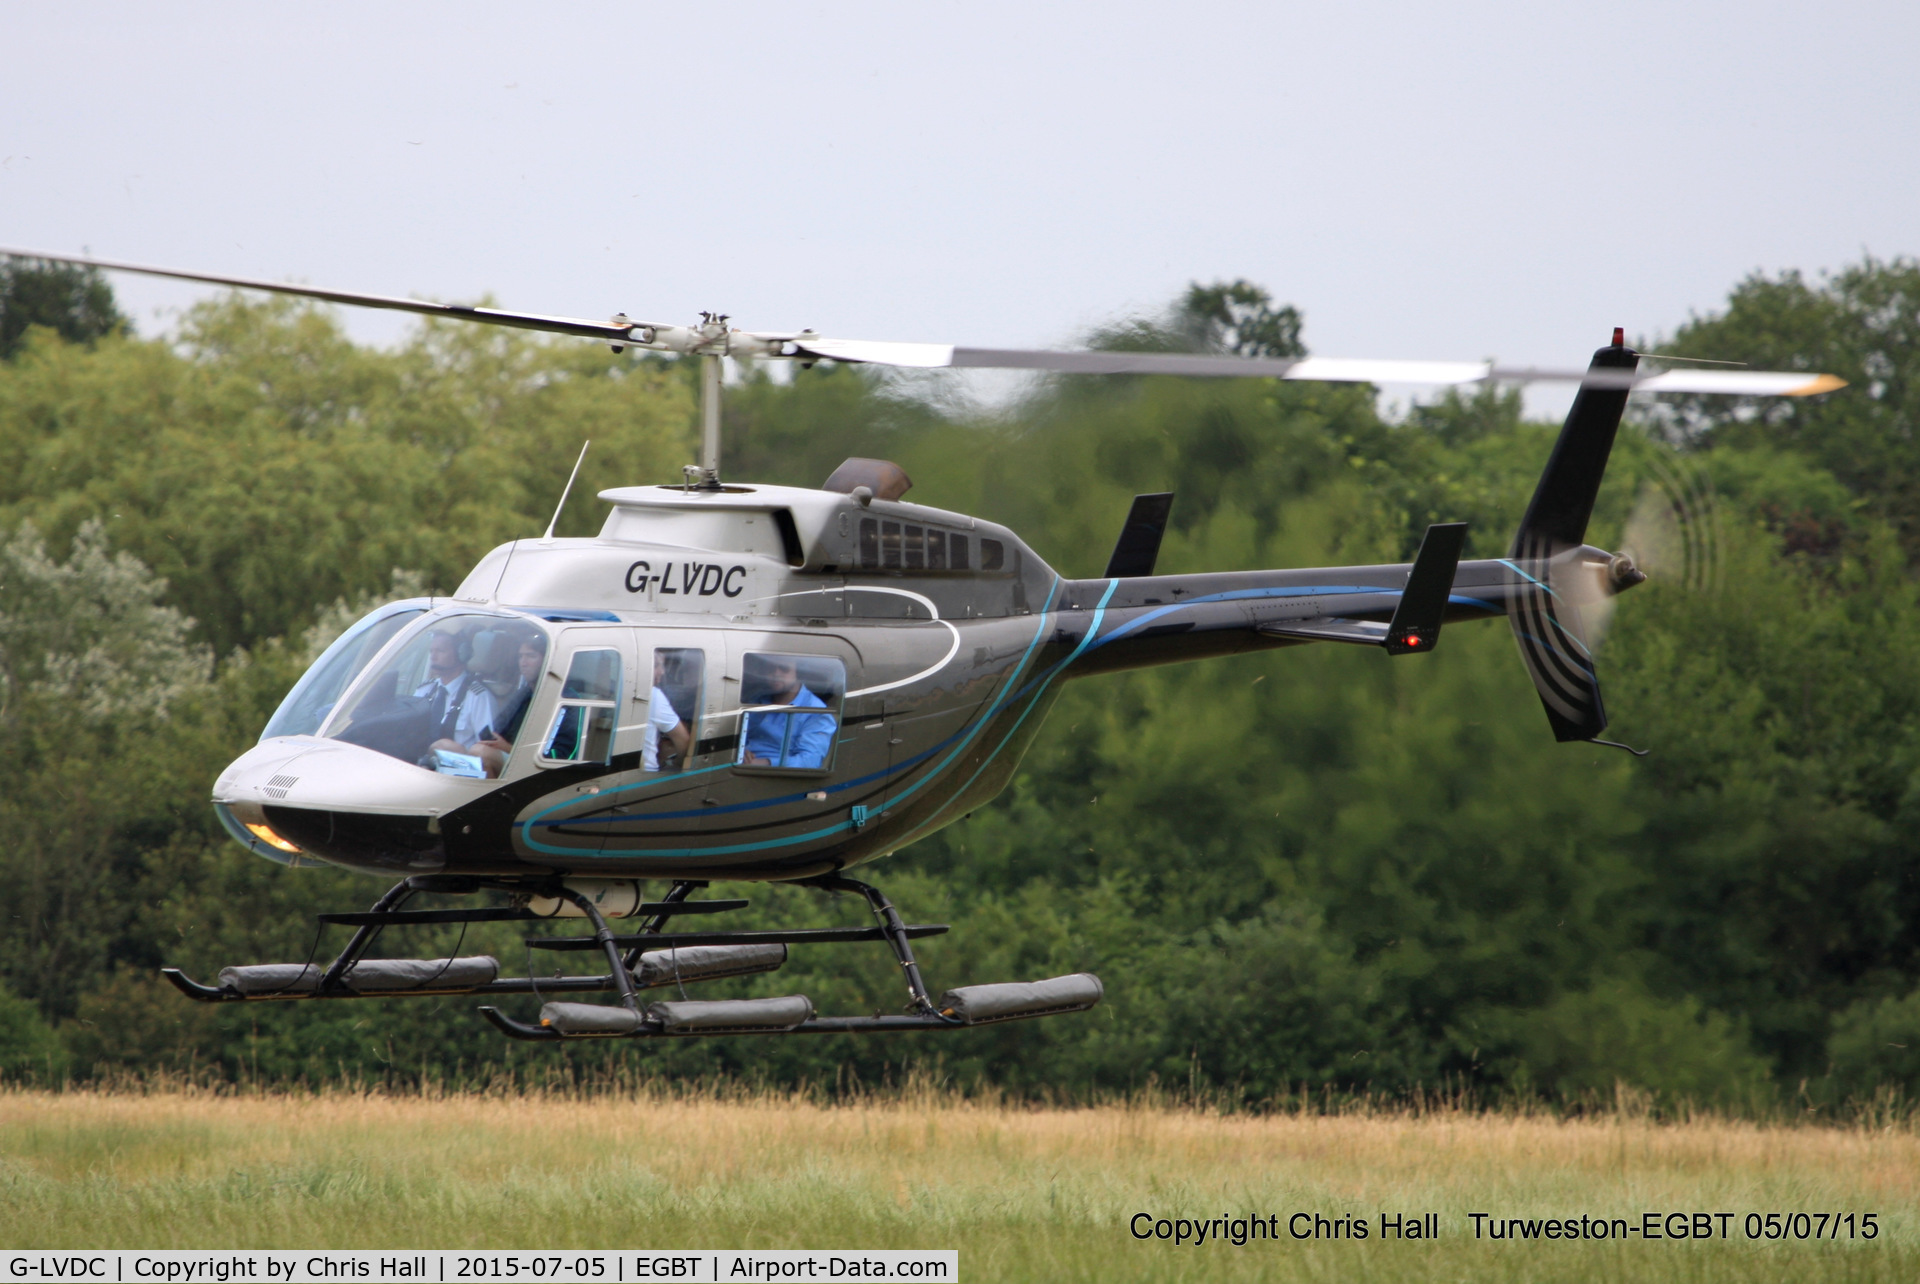 G-LVDC, 1989 Bell 206L-3 LongRanger III C/N 51300, ferrying race fans to the British F1 Grand Prix at Silverstone